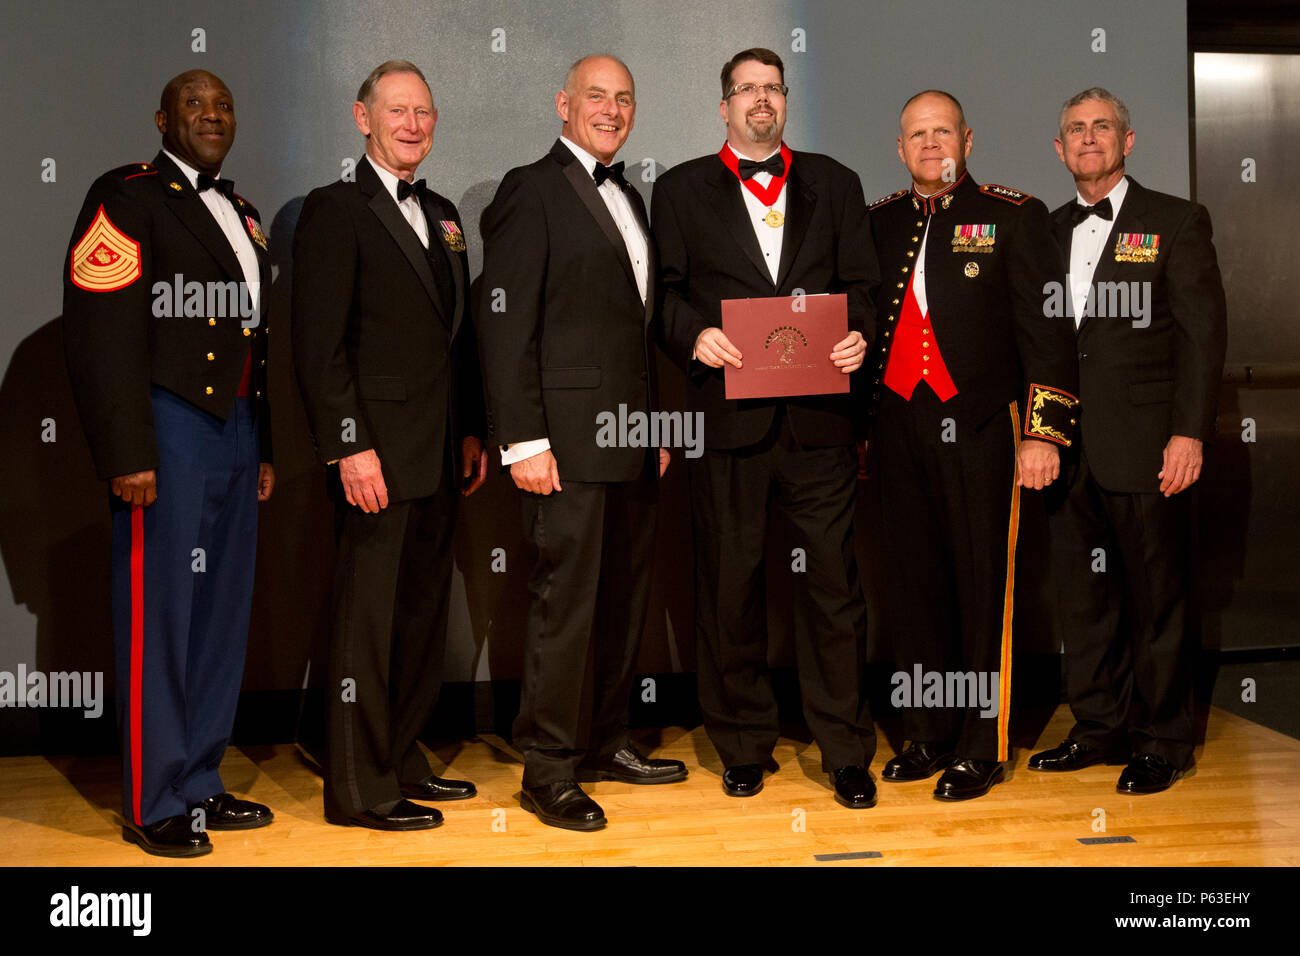 From left, Sgt. Maj. of the Marine Corps Ronald L. Green, retired U.S. Marine Gen. Walter E. Boomer, retired Marine Gen. John F. Kelly, Dr. David J. Ulbrich, Commandant of the Marine Corps Gen. Robert B. Neller, and retired Marine Lt. Gen. Robert R. Blackman, Jr., pose for a group photo during the Marine Corps Heritage Foundation awards presentation at the National Museum of the Marine Corps, Triangle, Va., April 23, 2016. Ulbrich was the recipient of the Colonel Robert D. Heinl, Jr. award for his submission, 'The U.S. Marine Corps, Amphibious Capabilities and Preparations for War with Japan.' Stock Photo